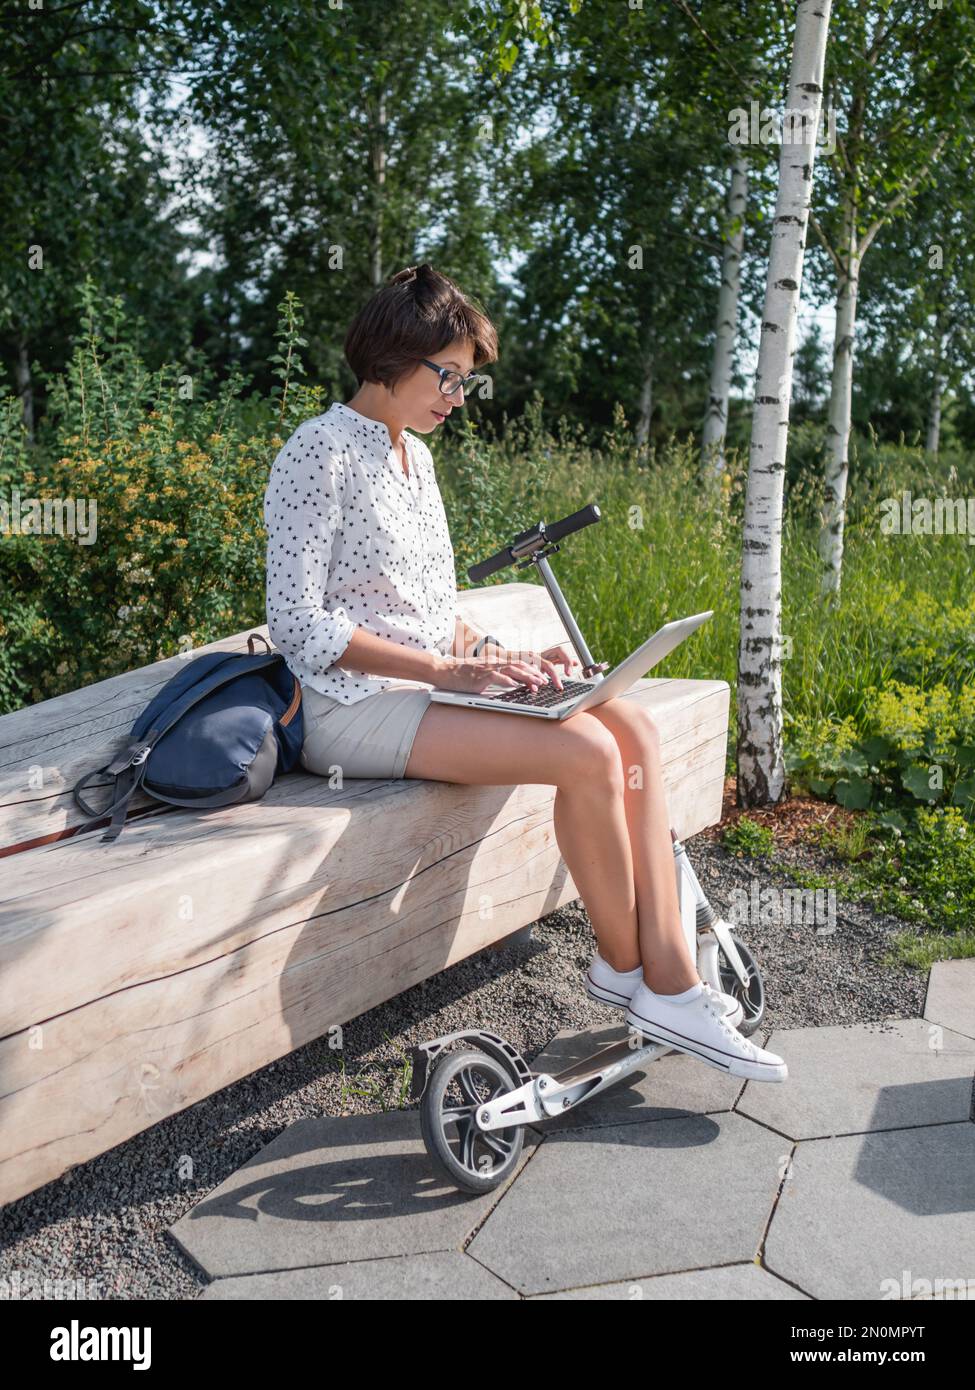 Mindful woman works with laptop on wooden bench in urban park. Summer vibes. Modern workplace for freelancers. Student educates online from outdoors. Stock Photo